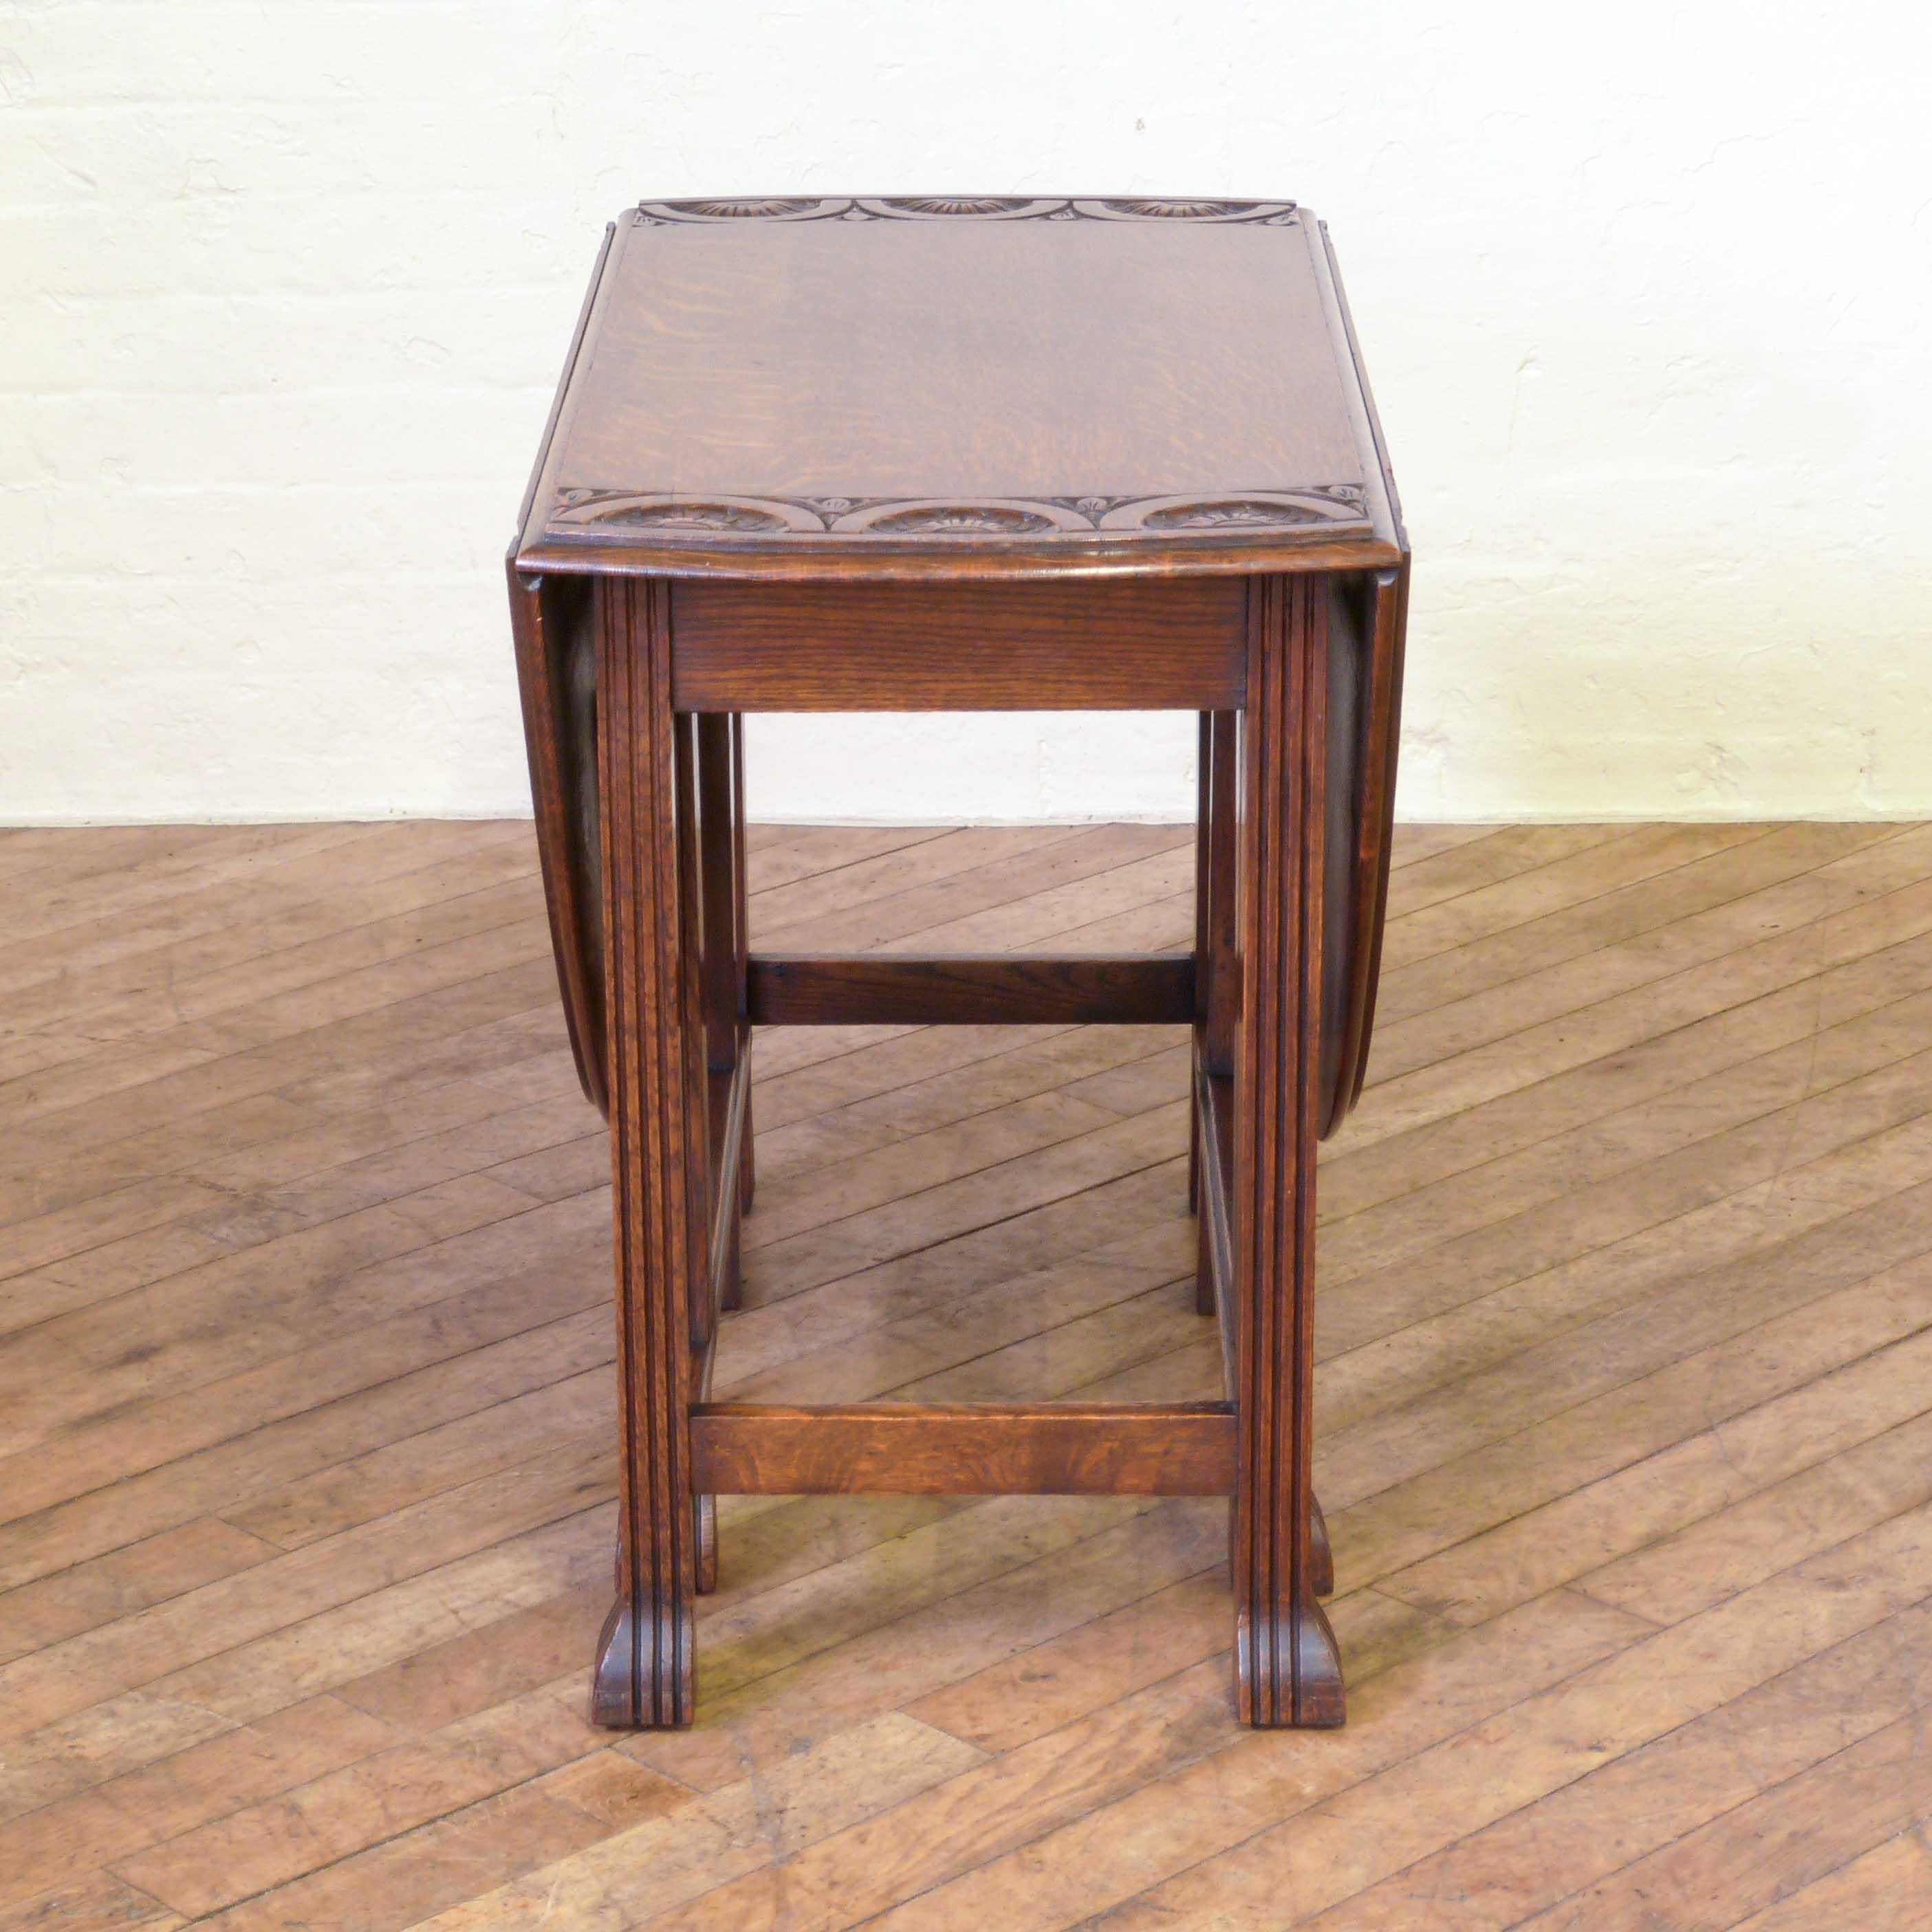 Carved Oak Gateleg Table with Reeded Legs